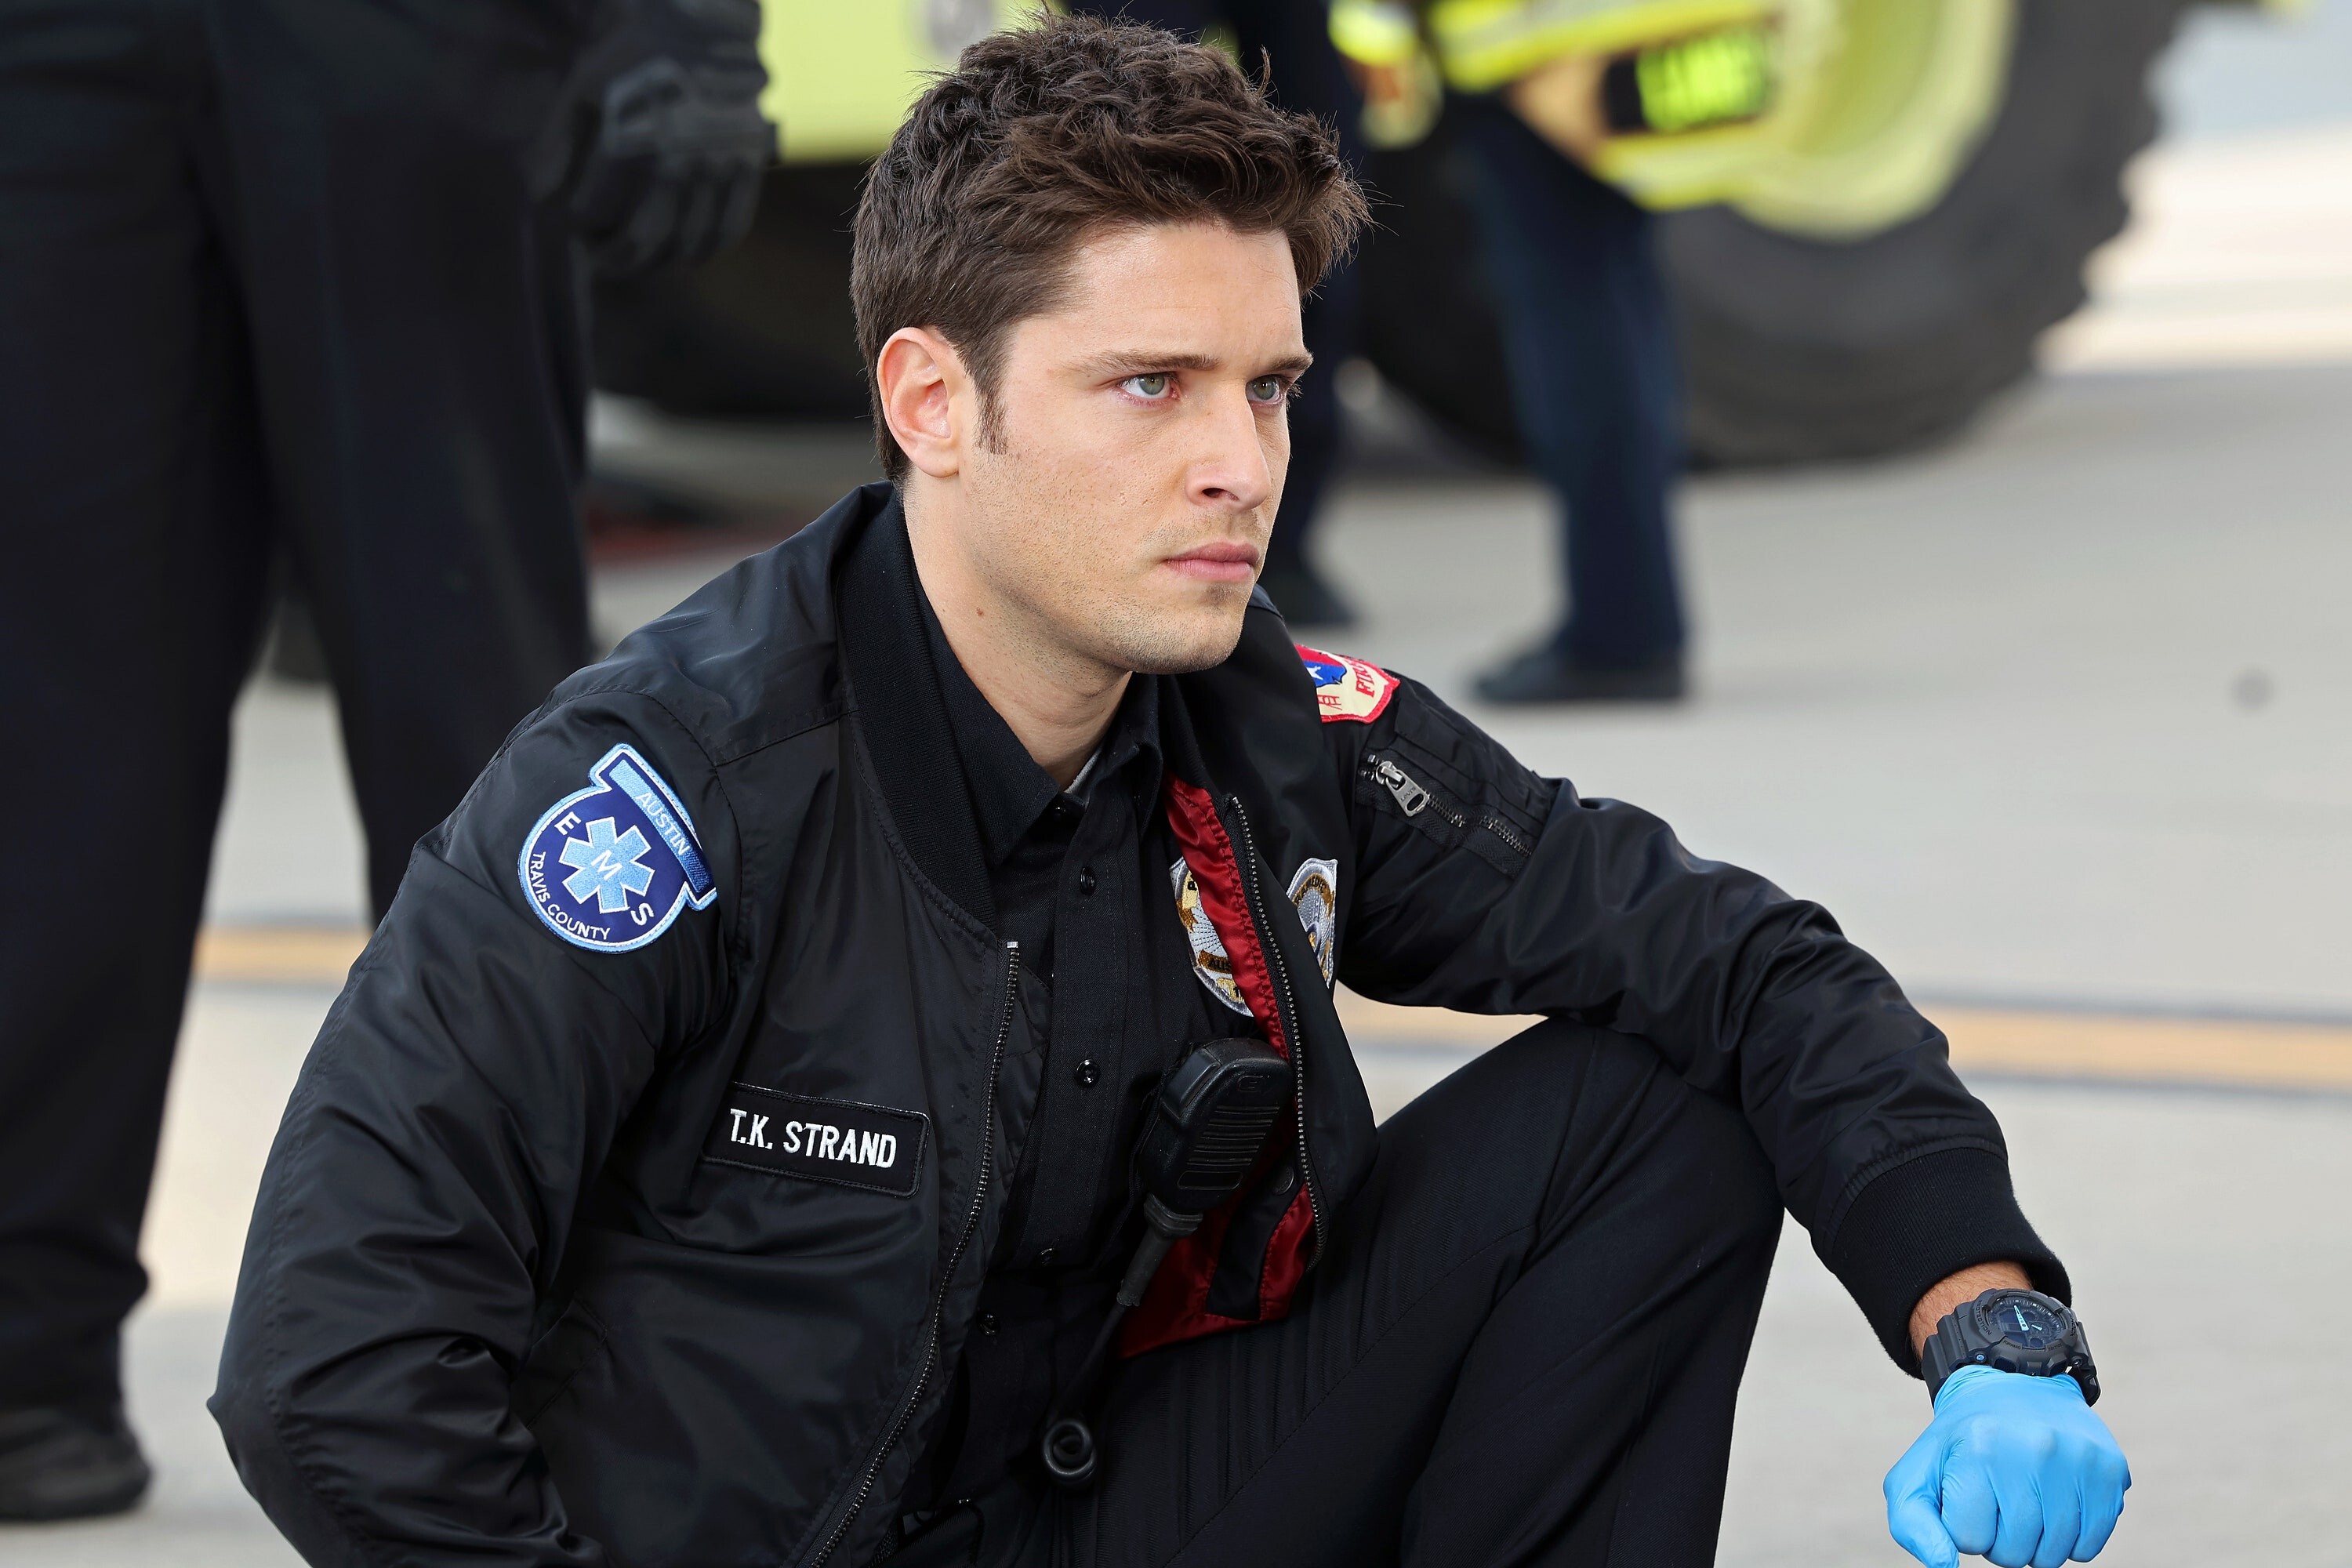 9-1-1: Lone Star (TV Series): Tyler Kennedy "T.K." Strand, A Firefighter From The 126 Team, Captain Owen's Son. 3000x2000 HD Background.